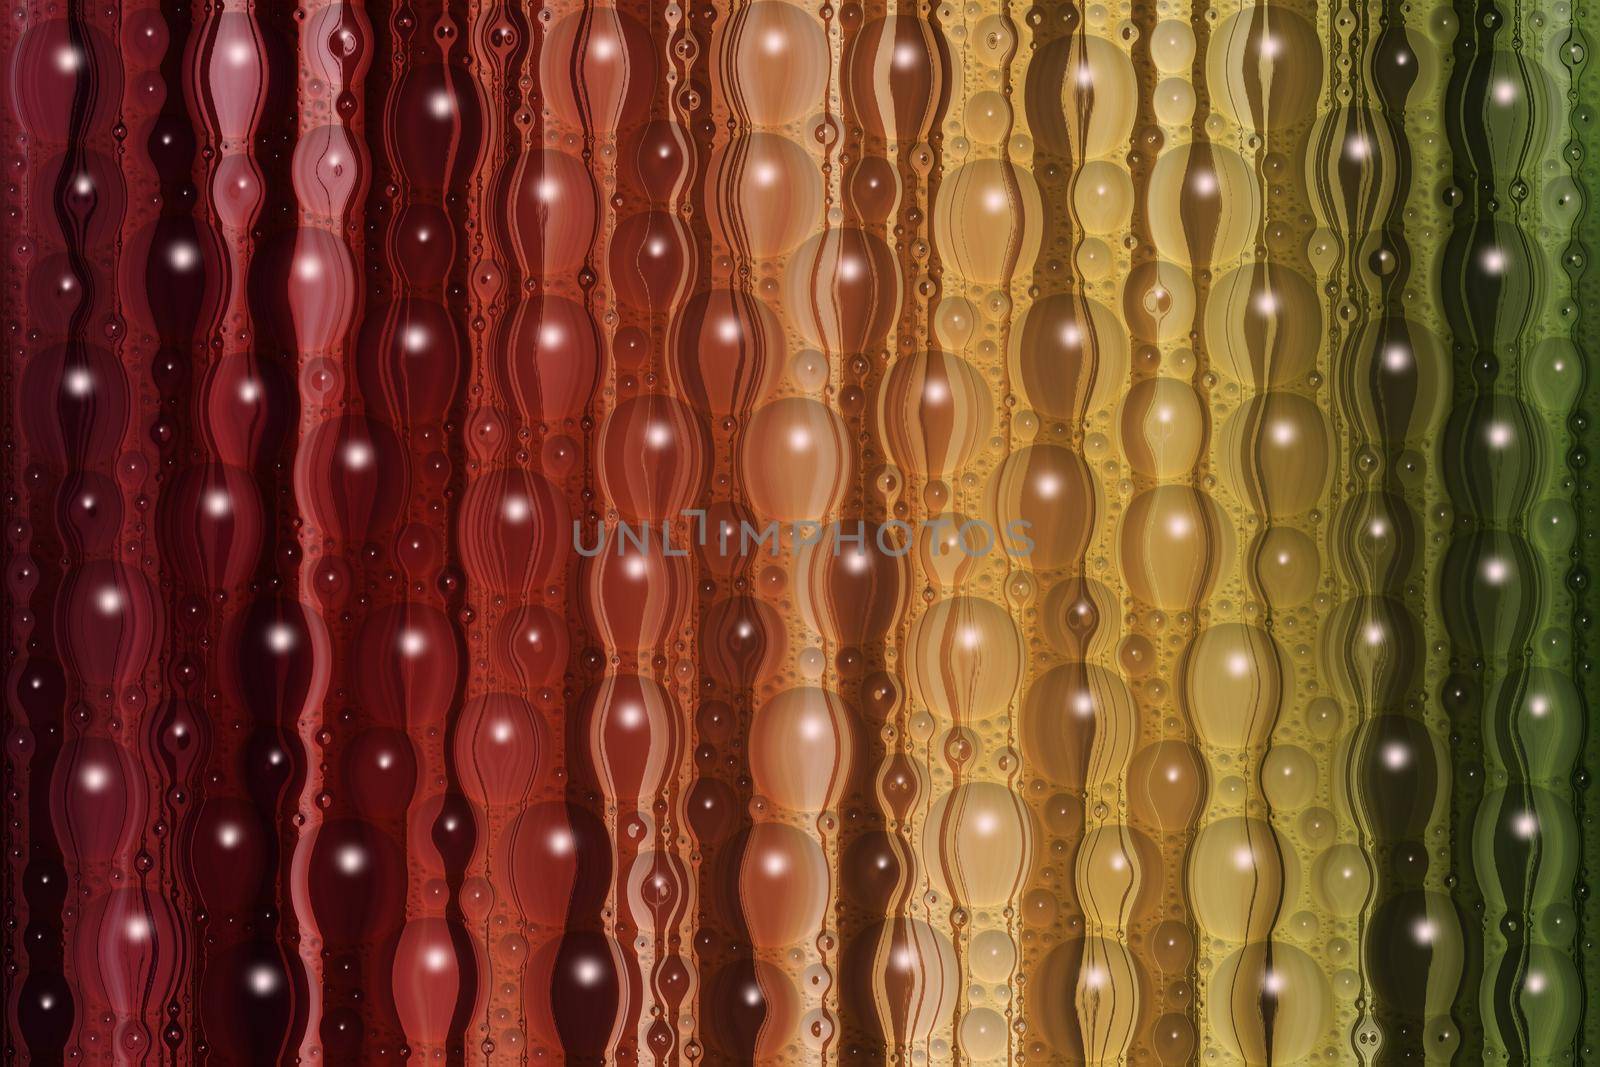 Red, orange, yellow, green vertical lines with water drops, bright abstract background